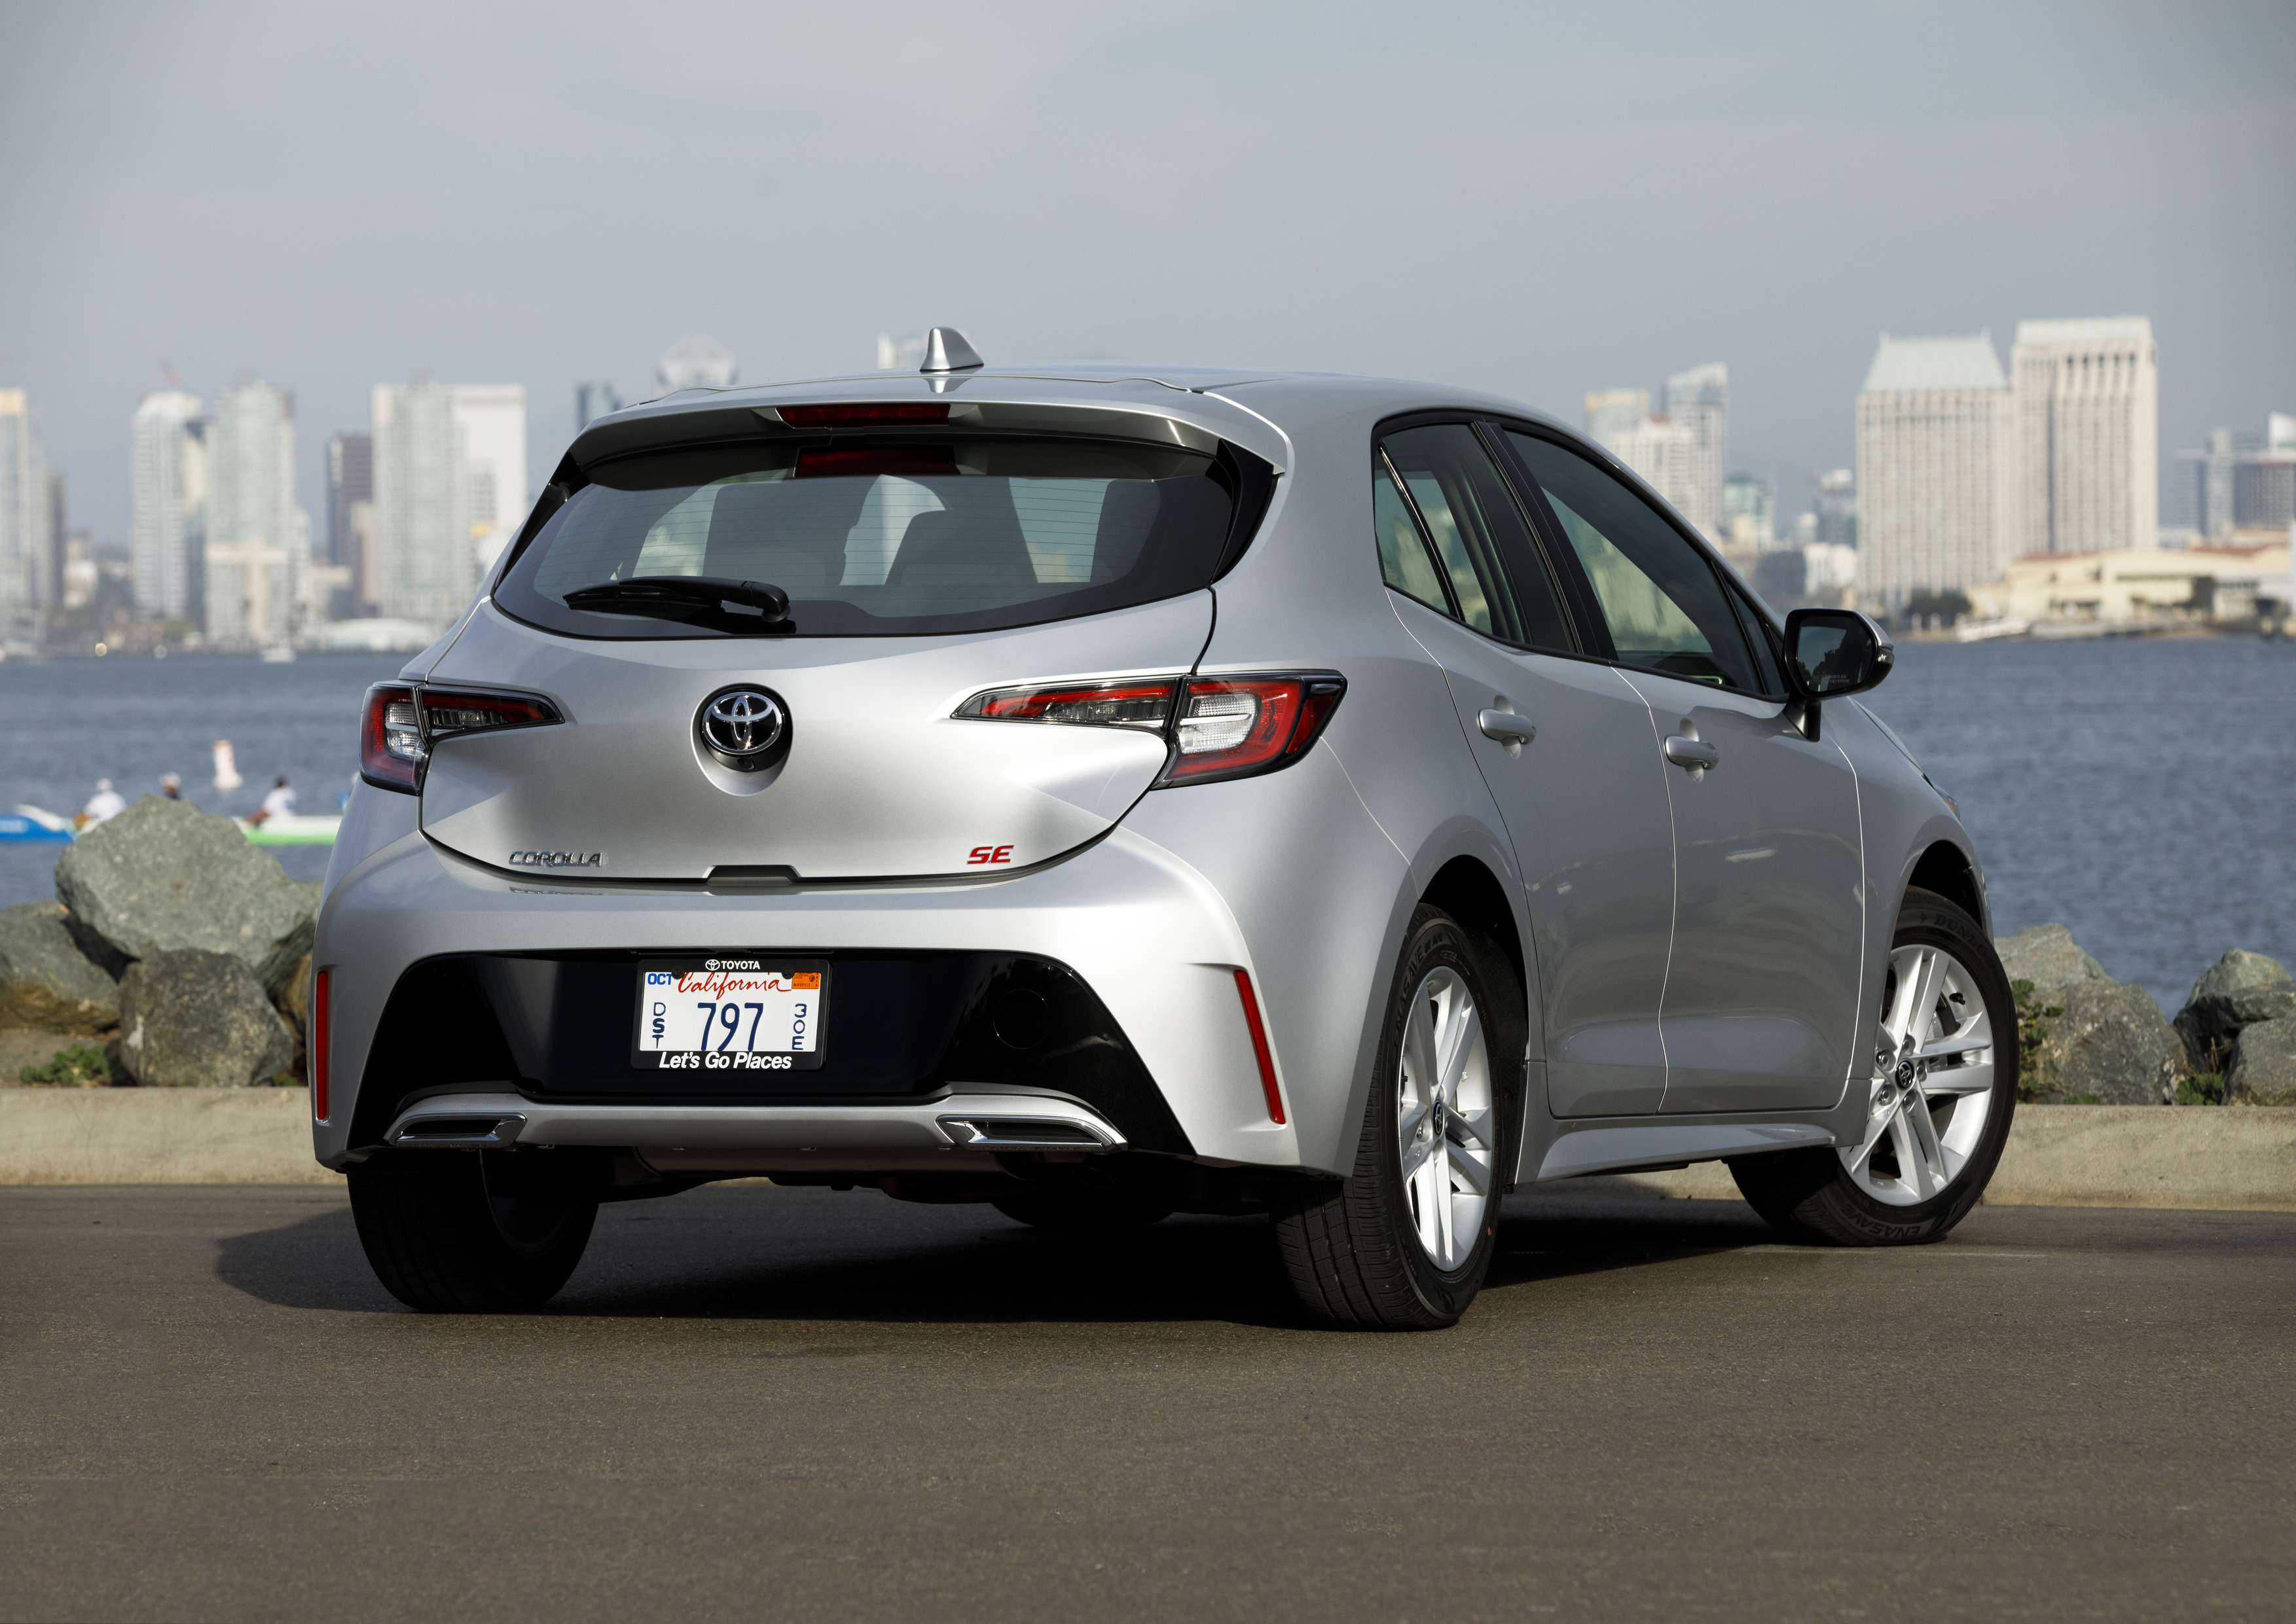 Toyota Corolla Hatchback exterior specifications